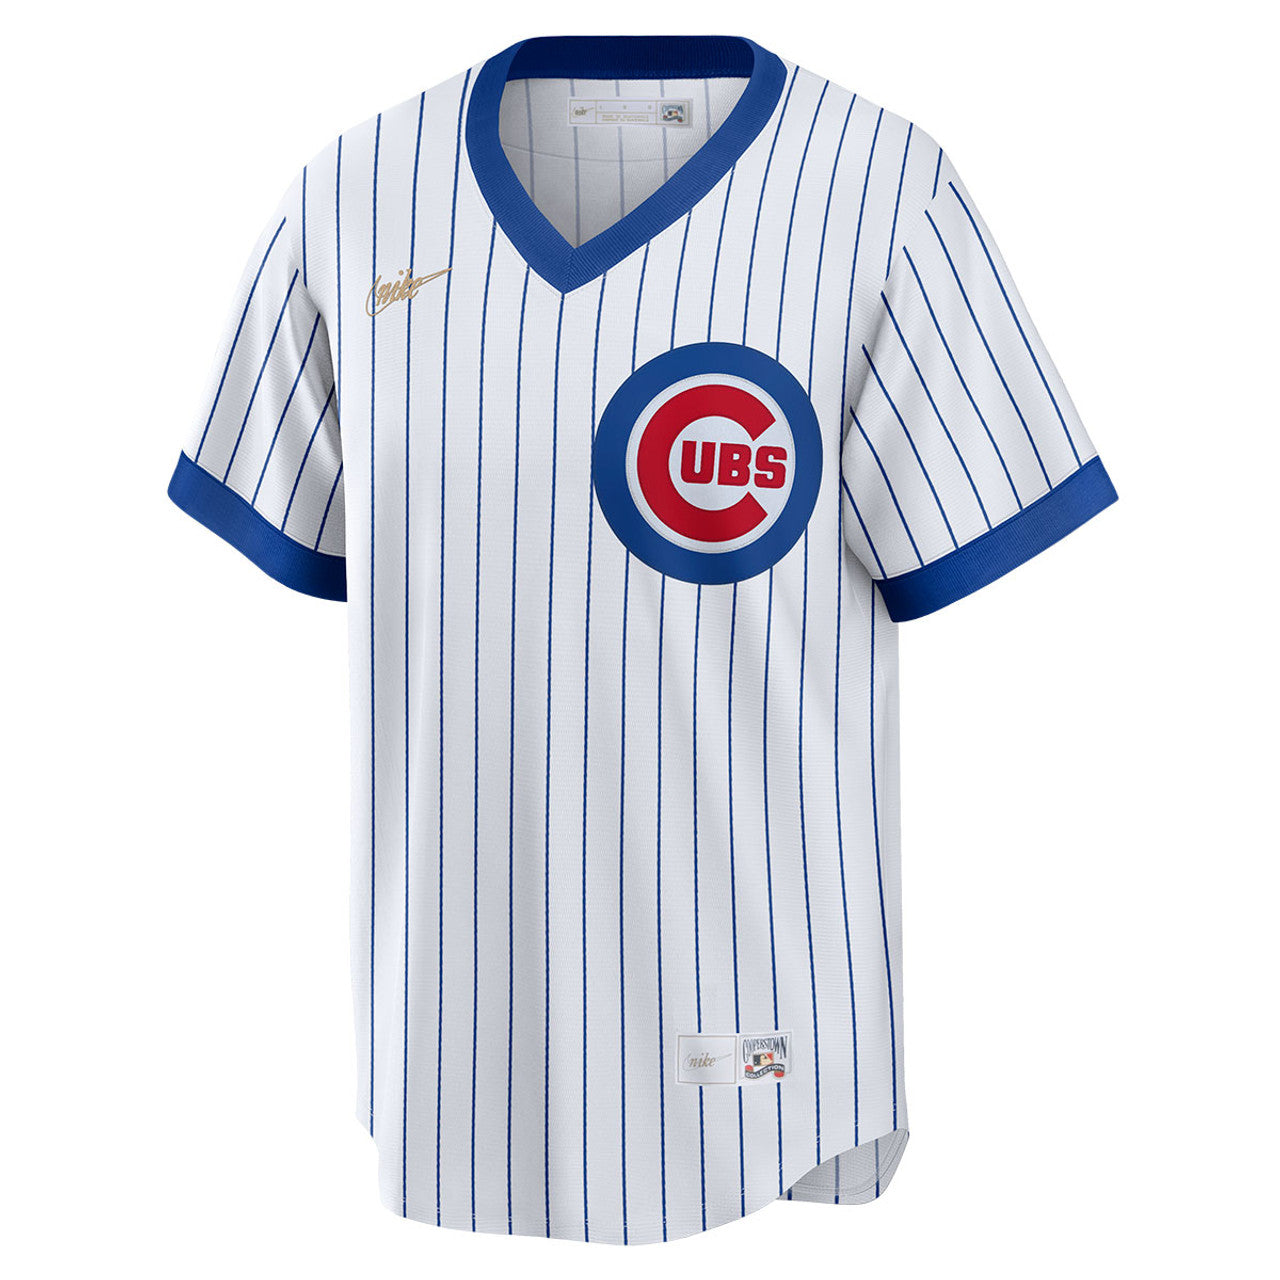 Men's Chicago Cubs Home White Cooperstown Replica Jersey by Nike